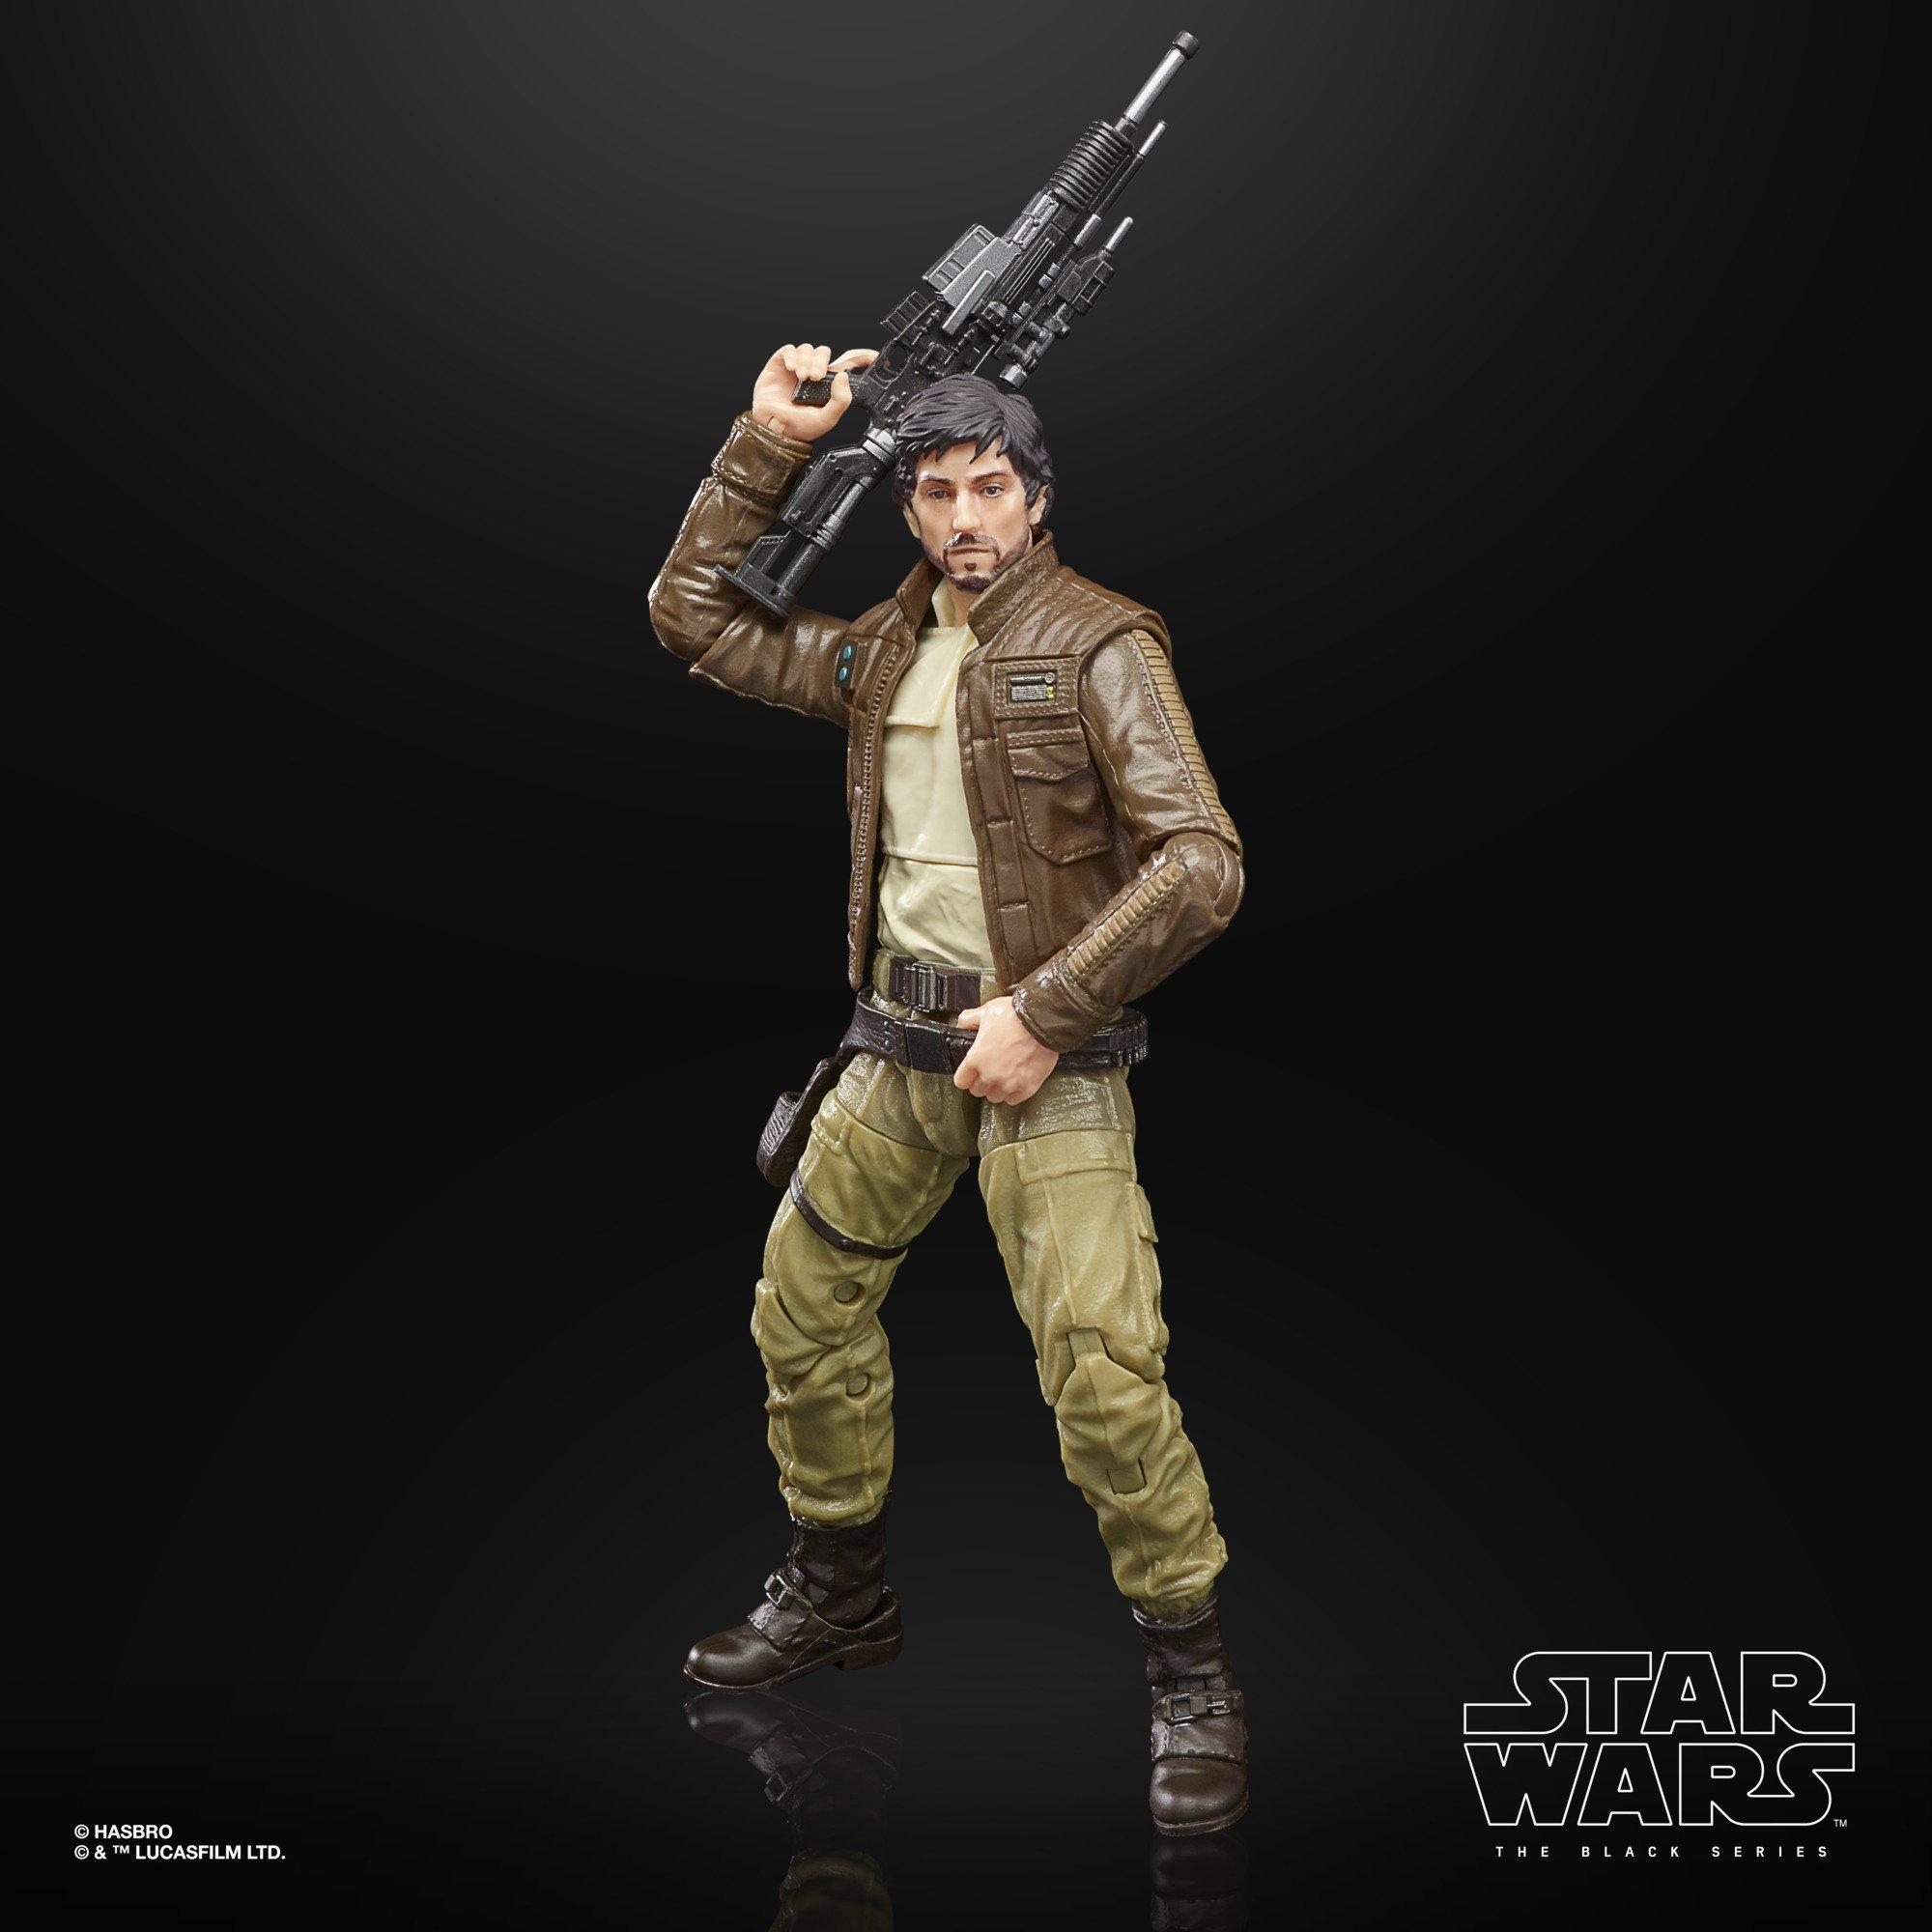 Star Wars Rogue One Action Figure Black Series 6-Inch CAPTAIN CASSIAN ANDOR 